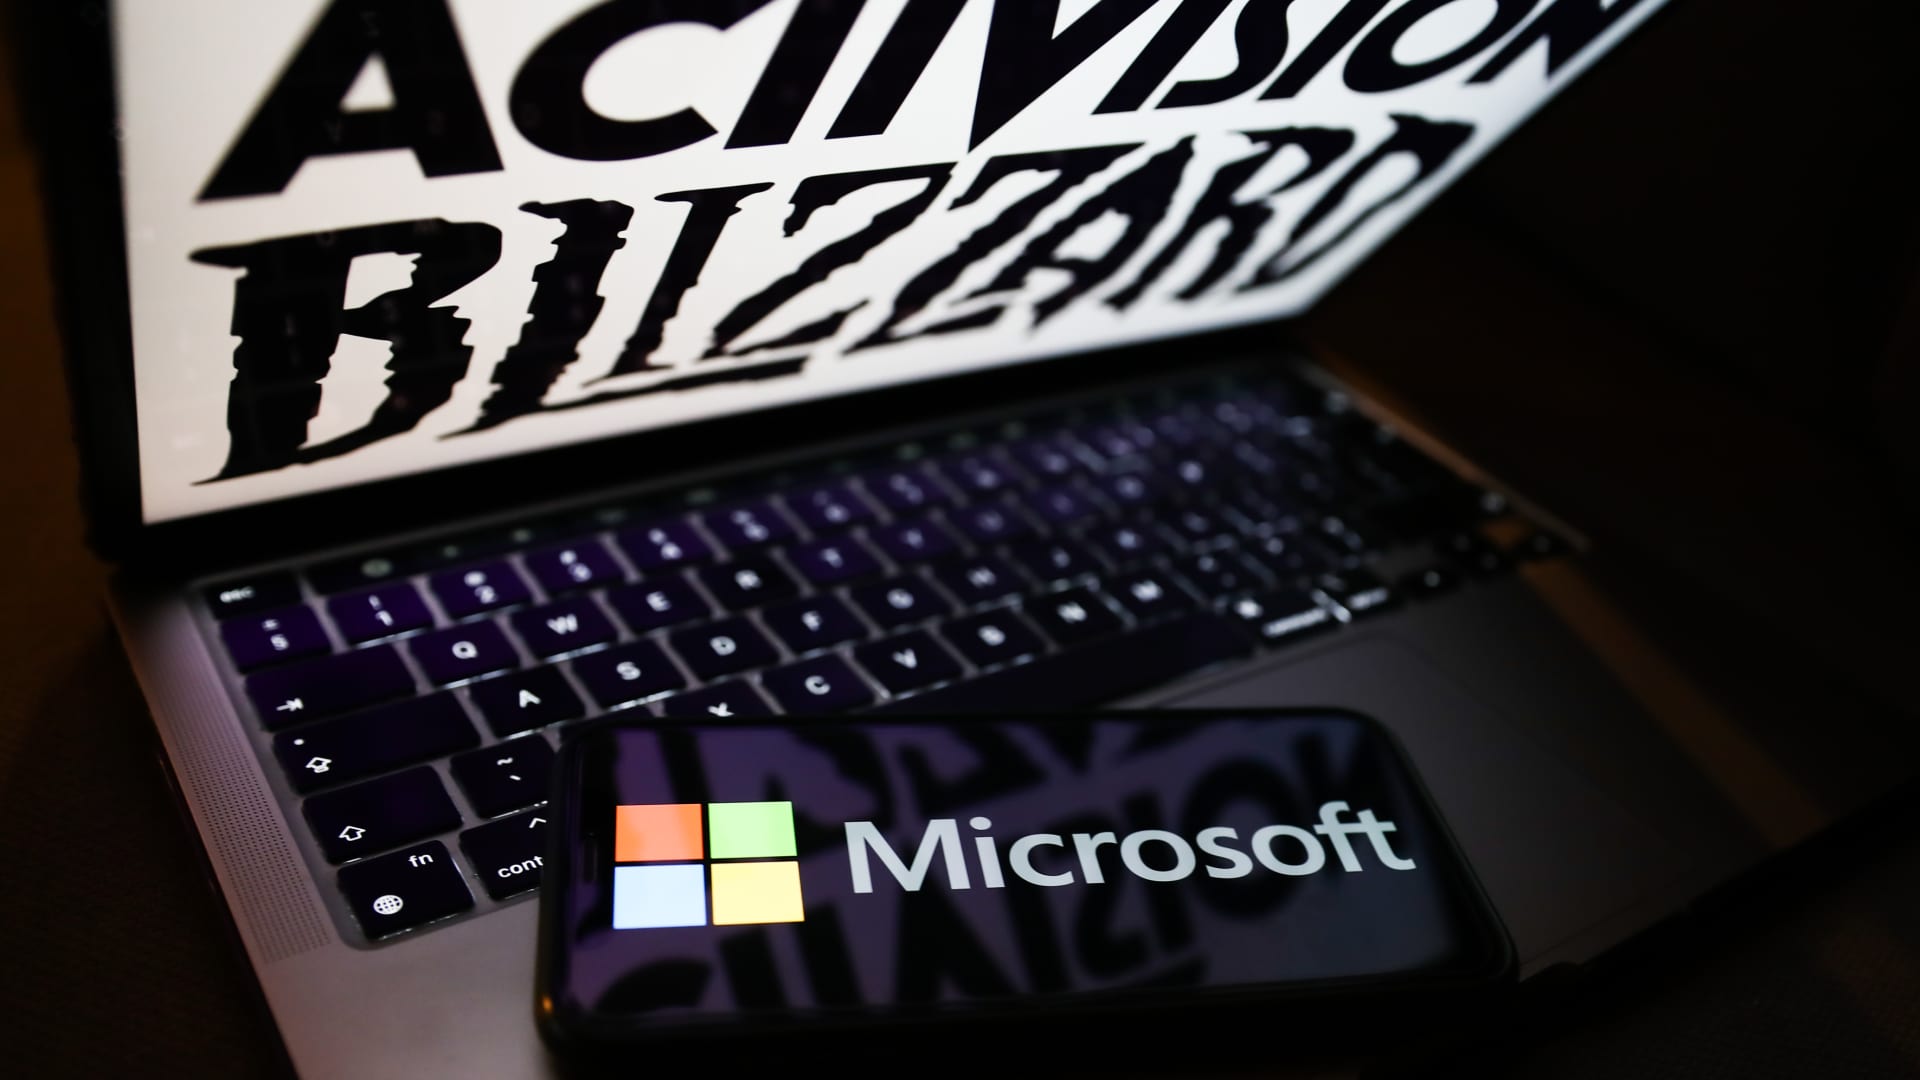 Microsoft’s president on fresh bid for Activision Blizzard: ‘Up to the regulators’ to decide